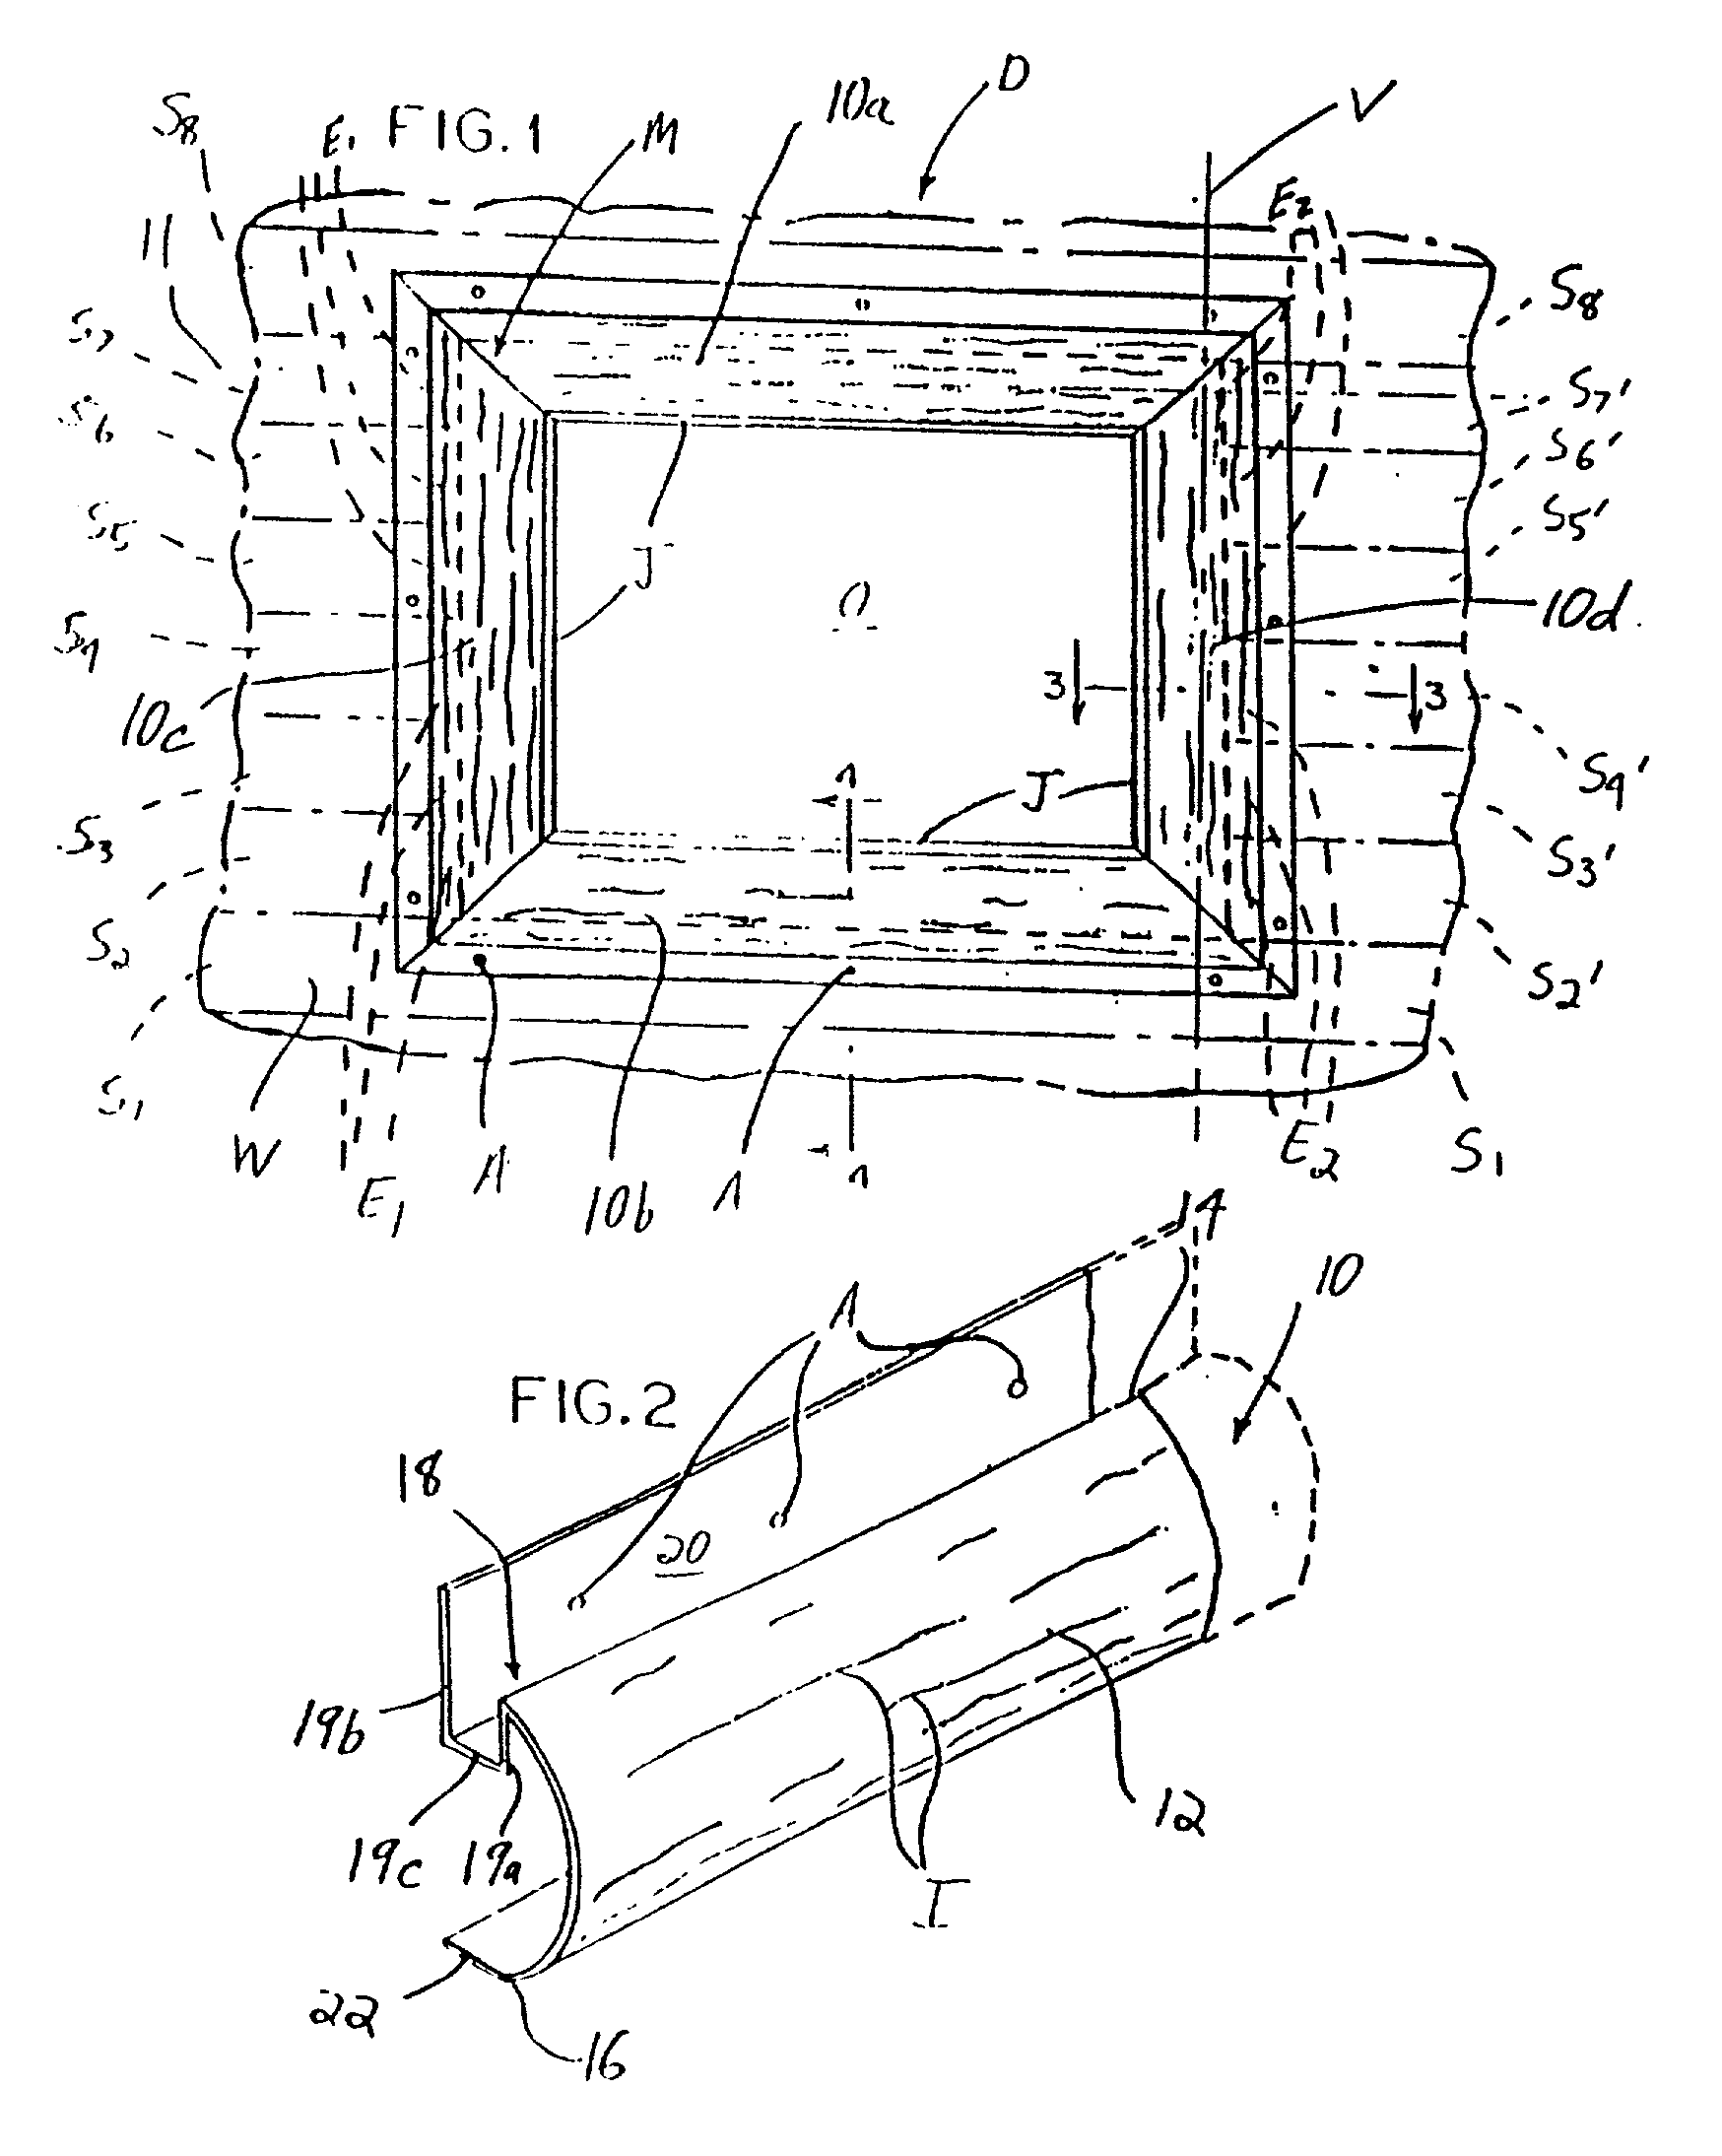 Trim component for use in a siding system